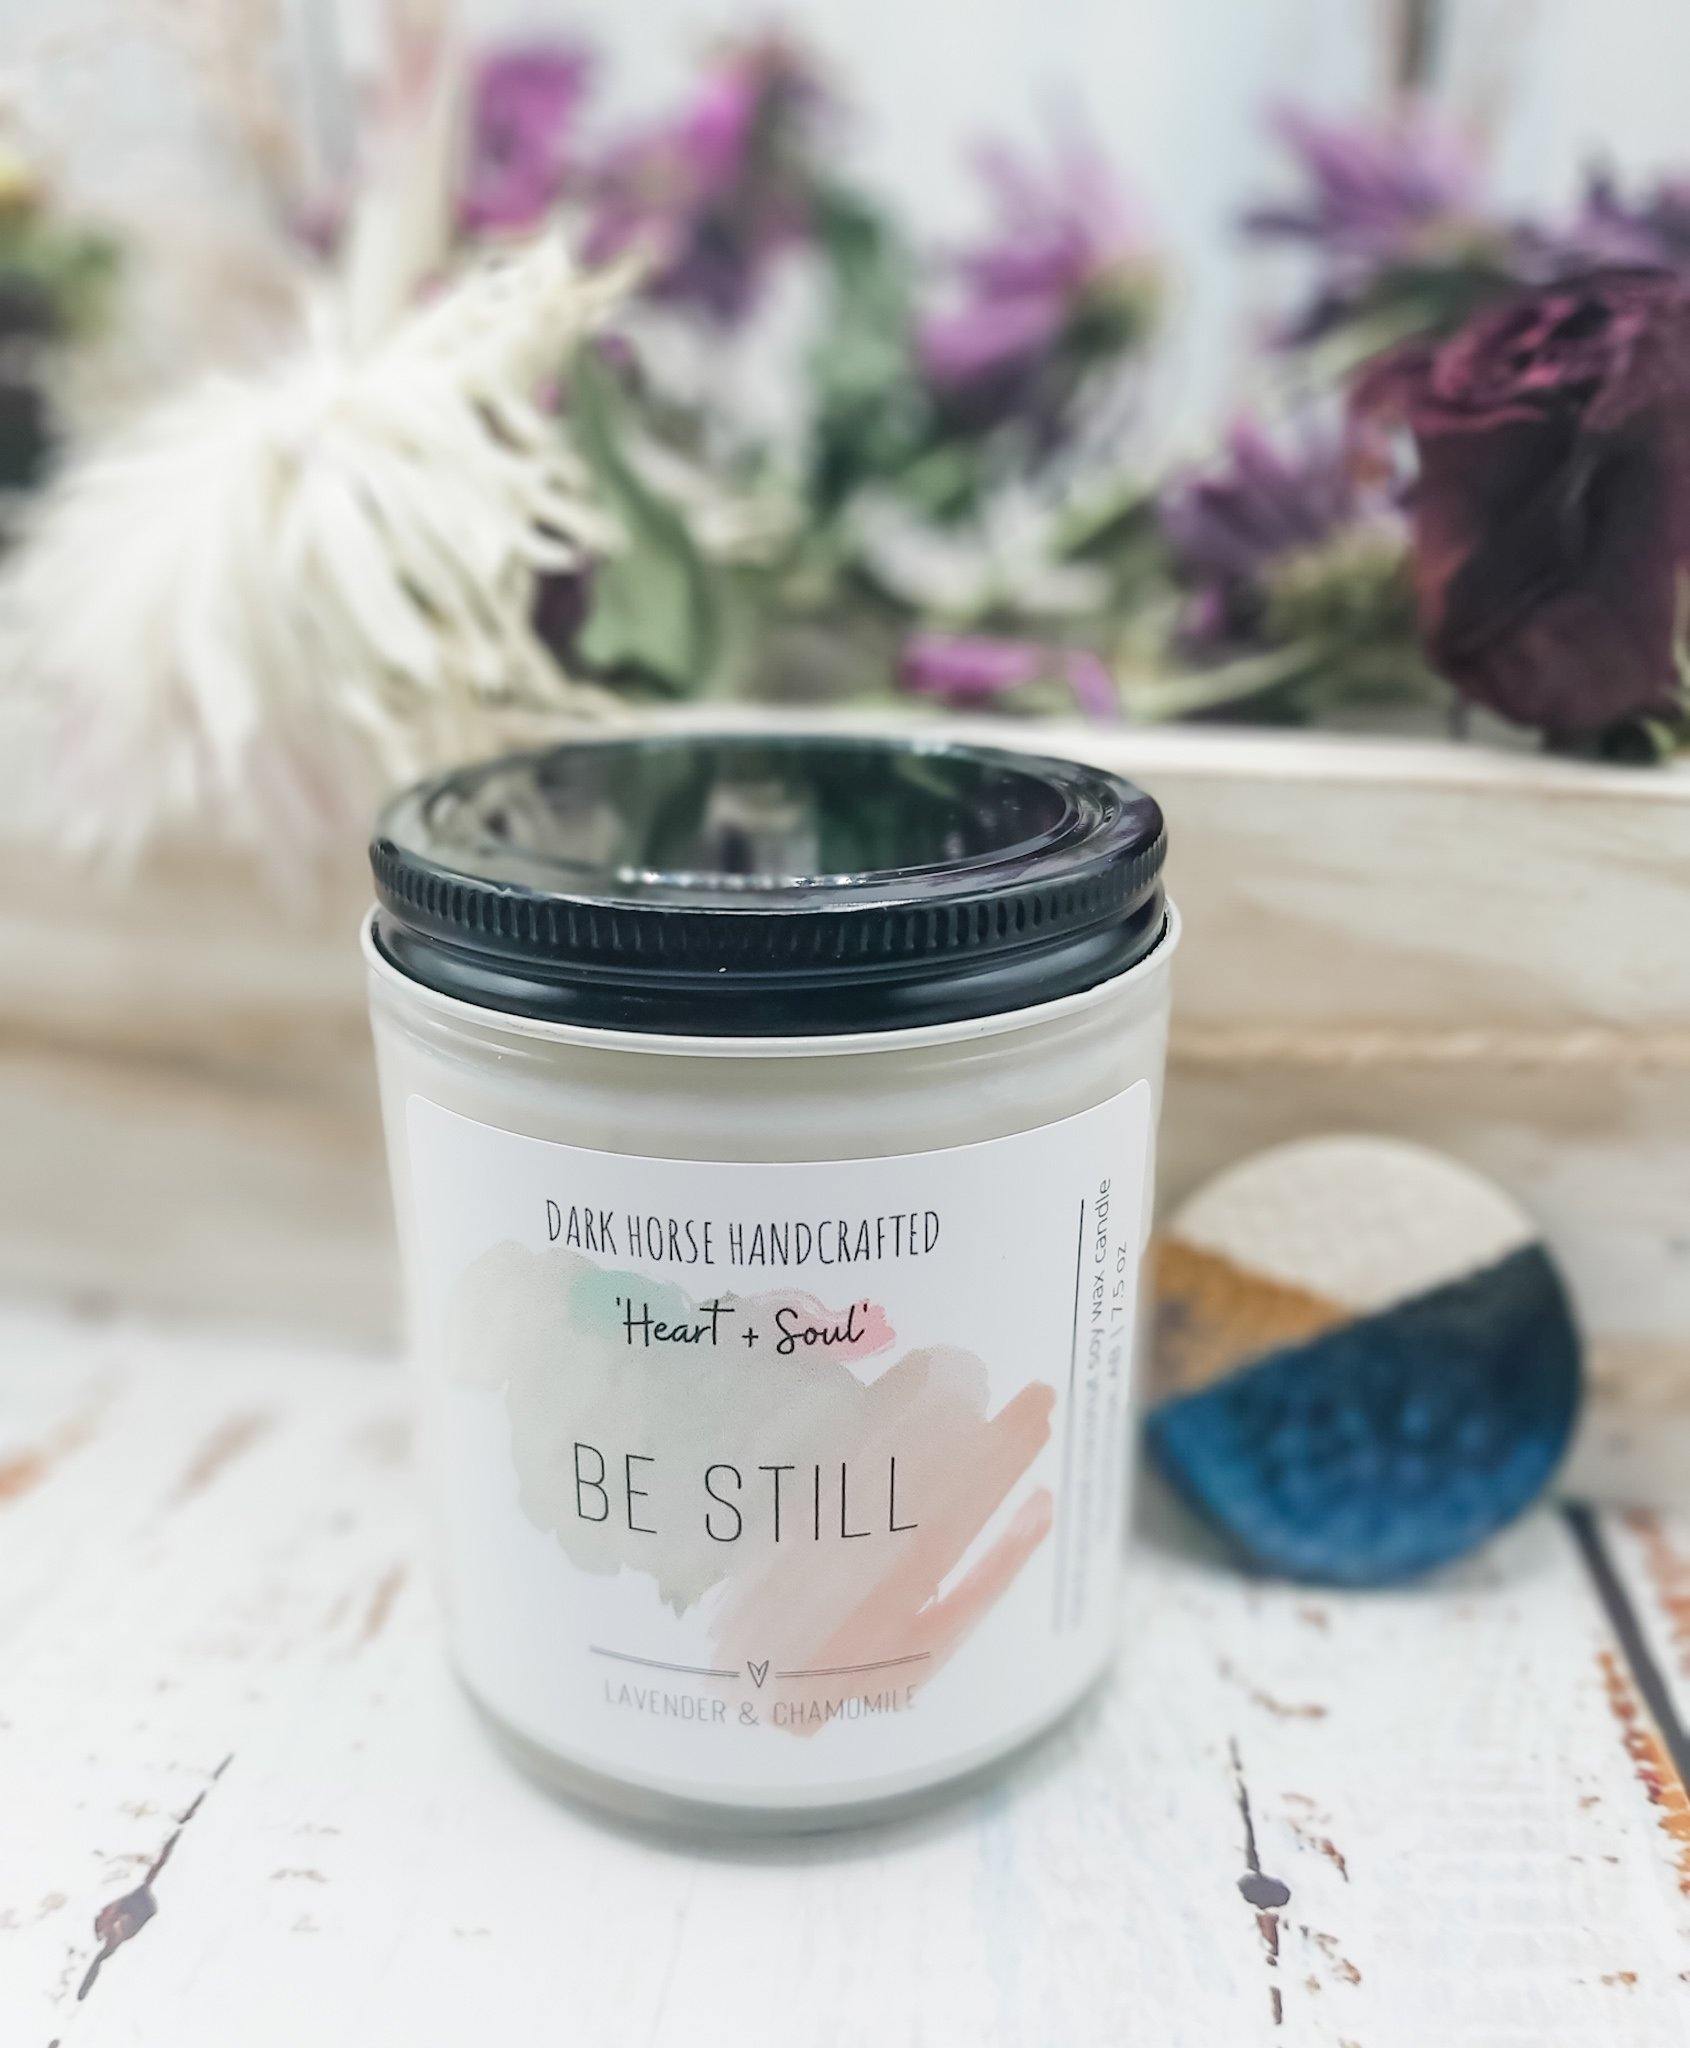 Be Still - Lavender & Chamomile scented Soy Candle, 'Heart & Soul' Collection - Dark Horse Handcrafted, wooden wick, alberta made